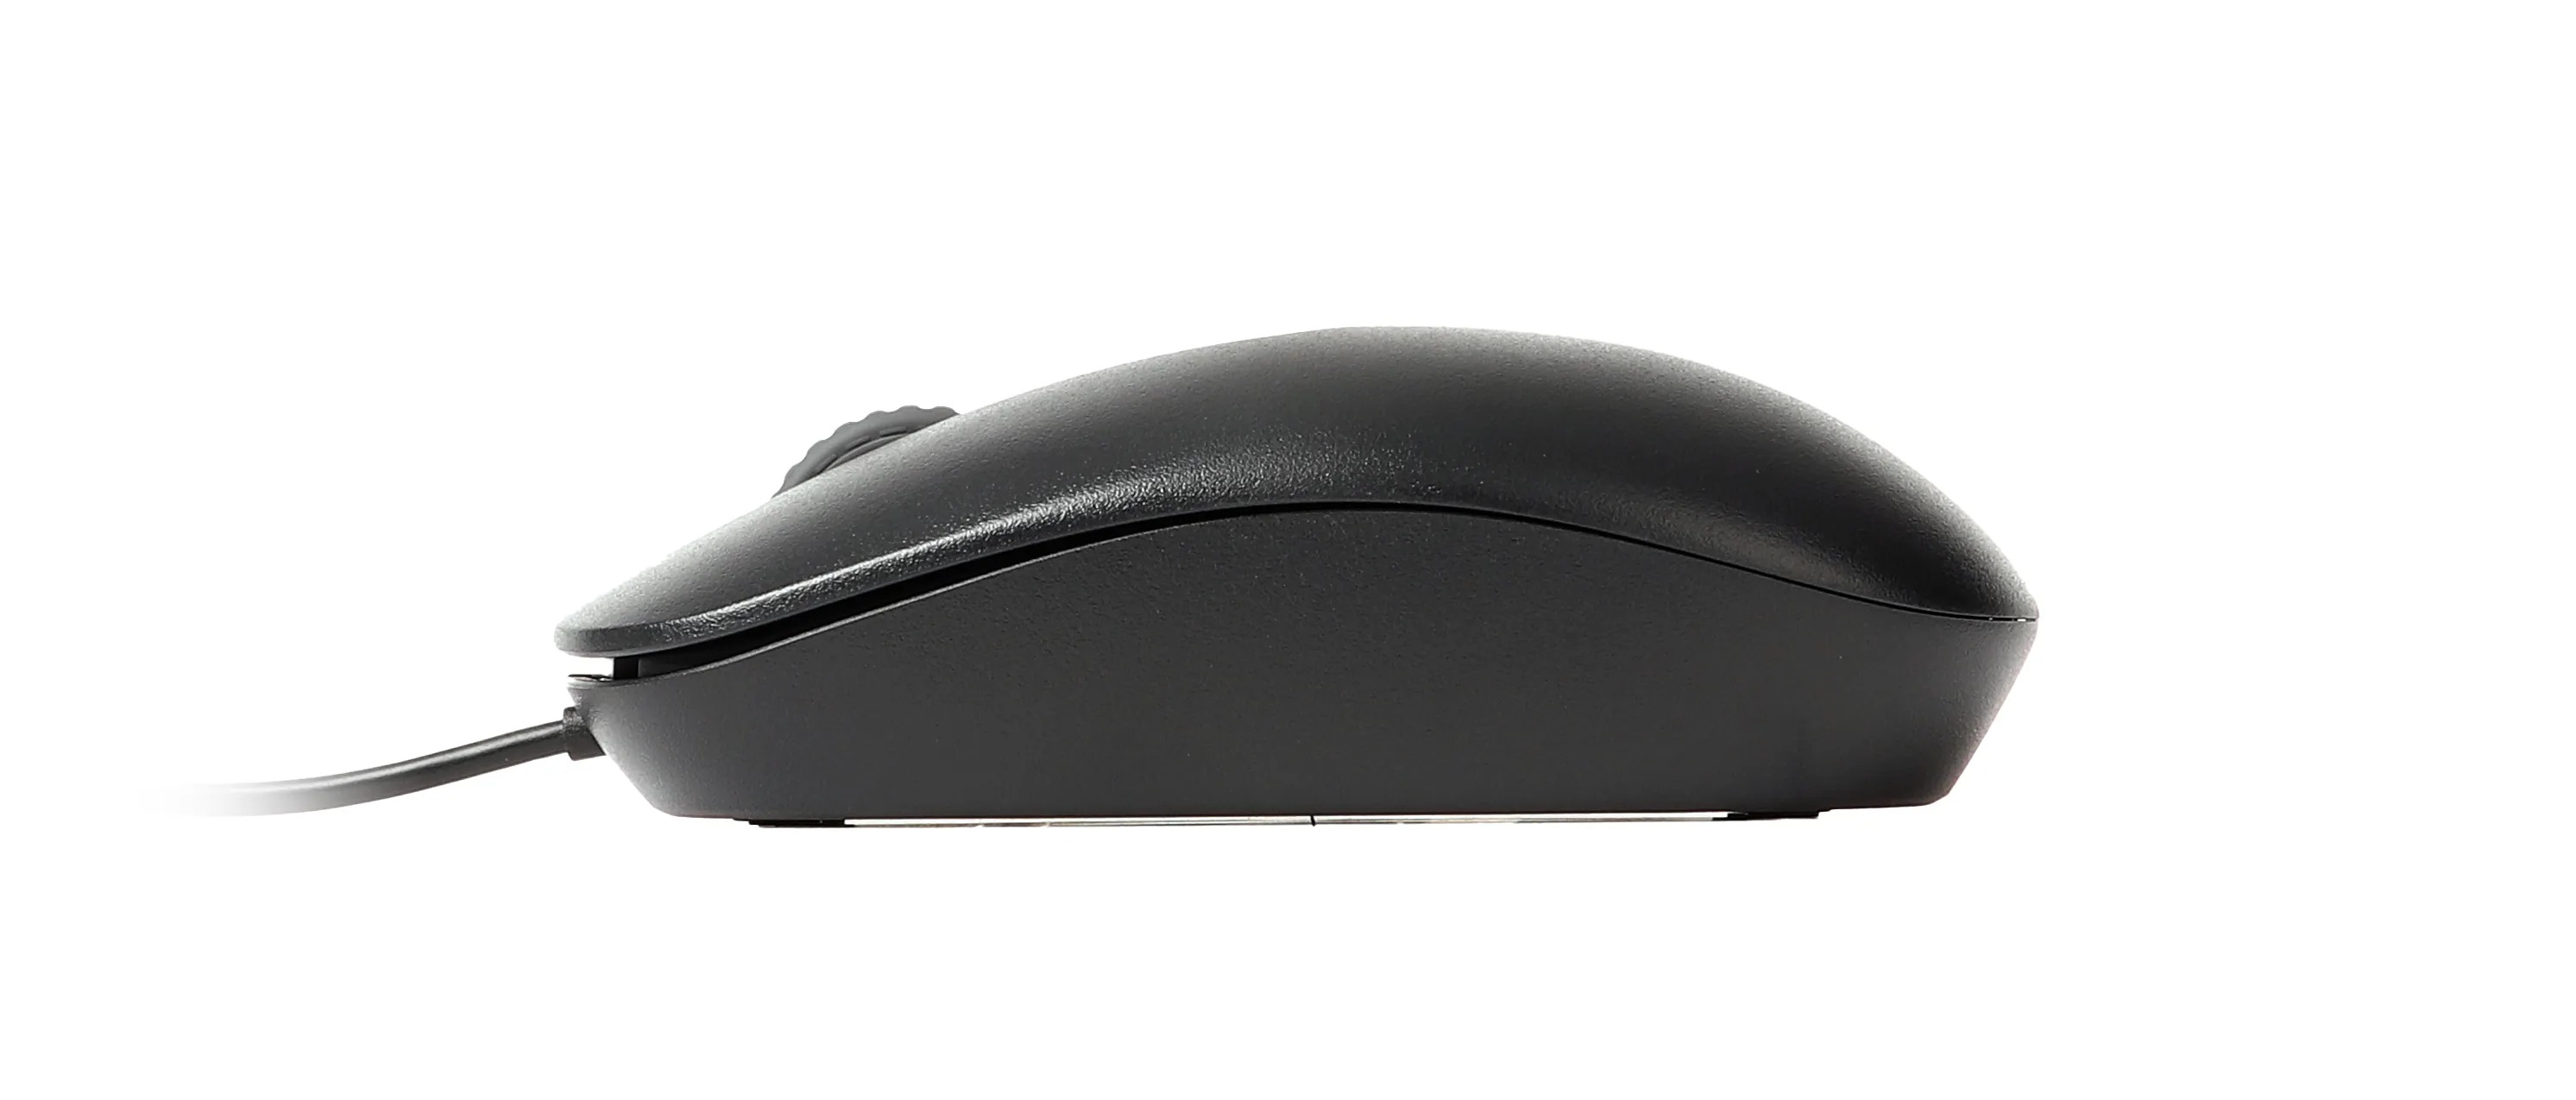 RAPOO N200 WIRED OPTICAL MOUSE BLACK - 18548